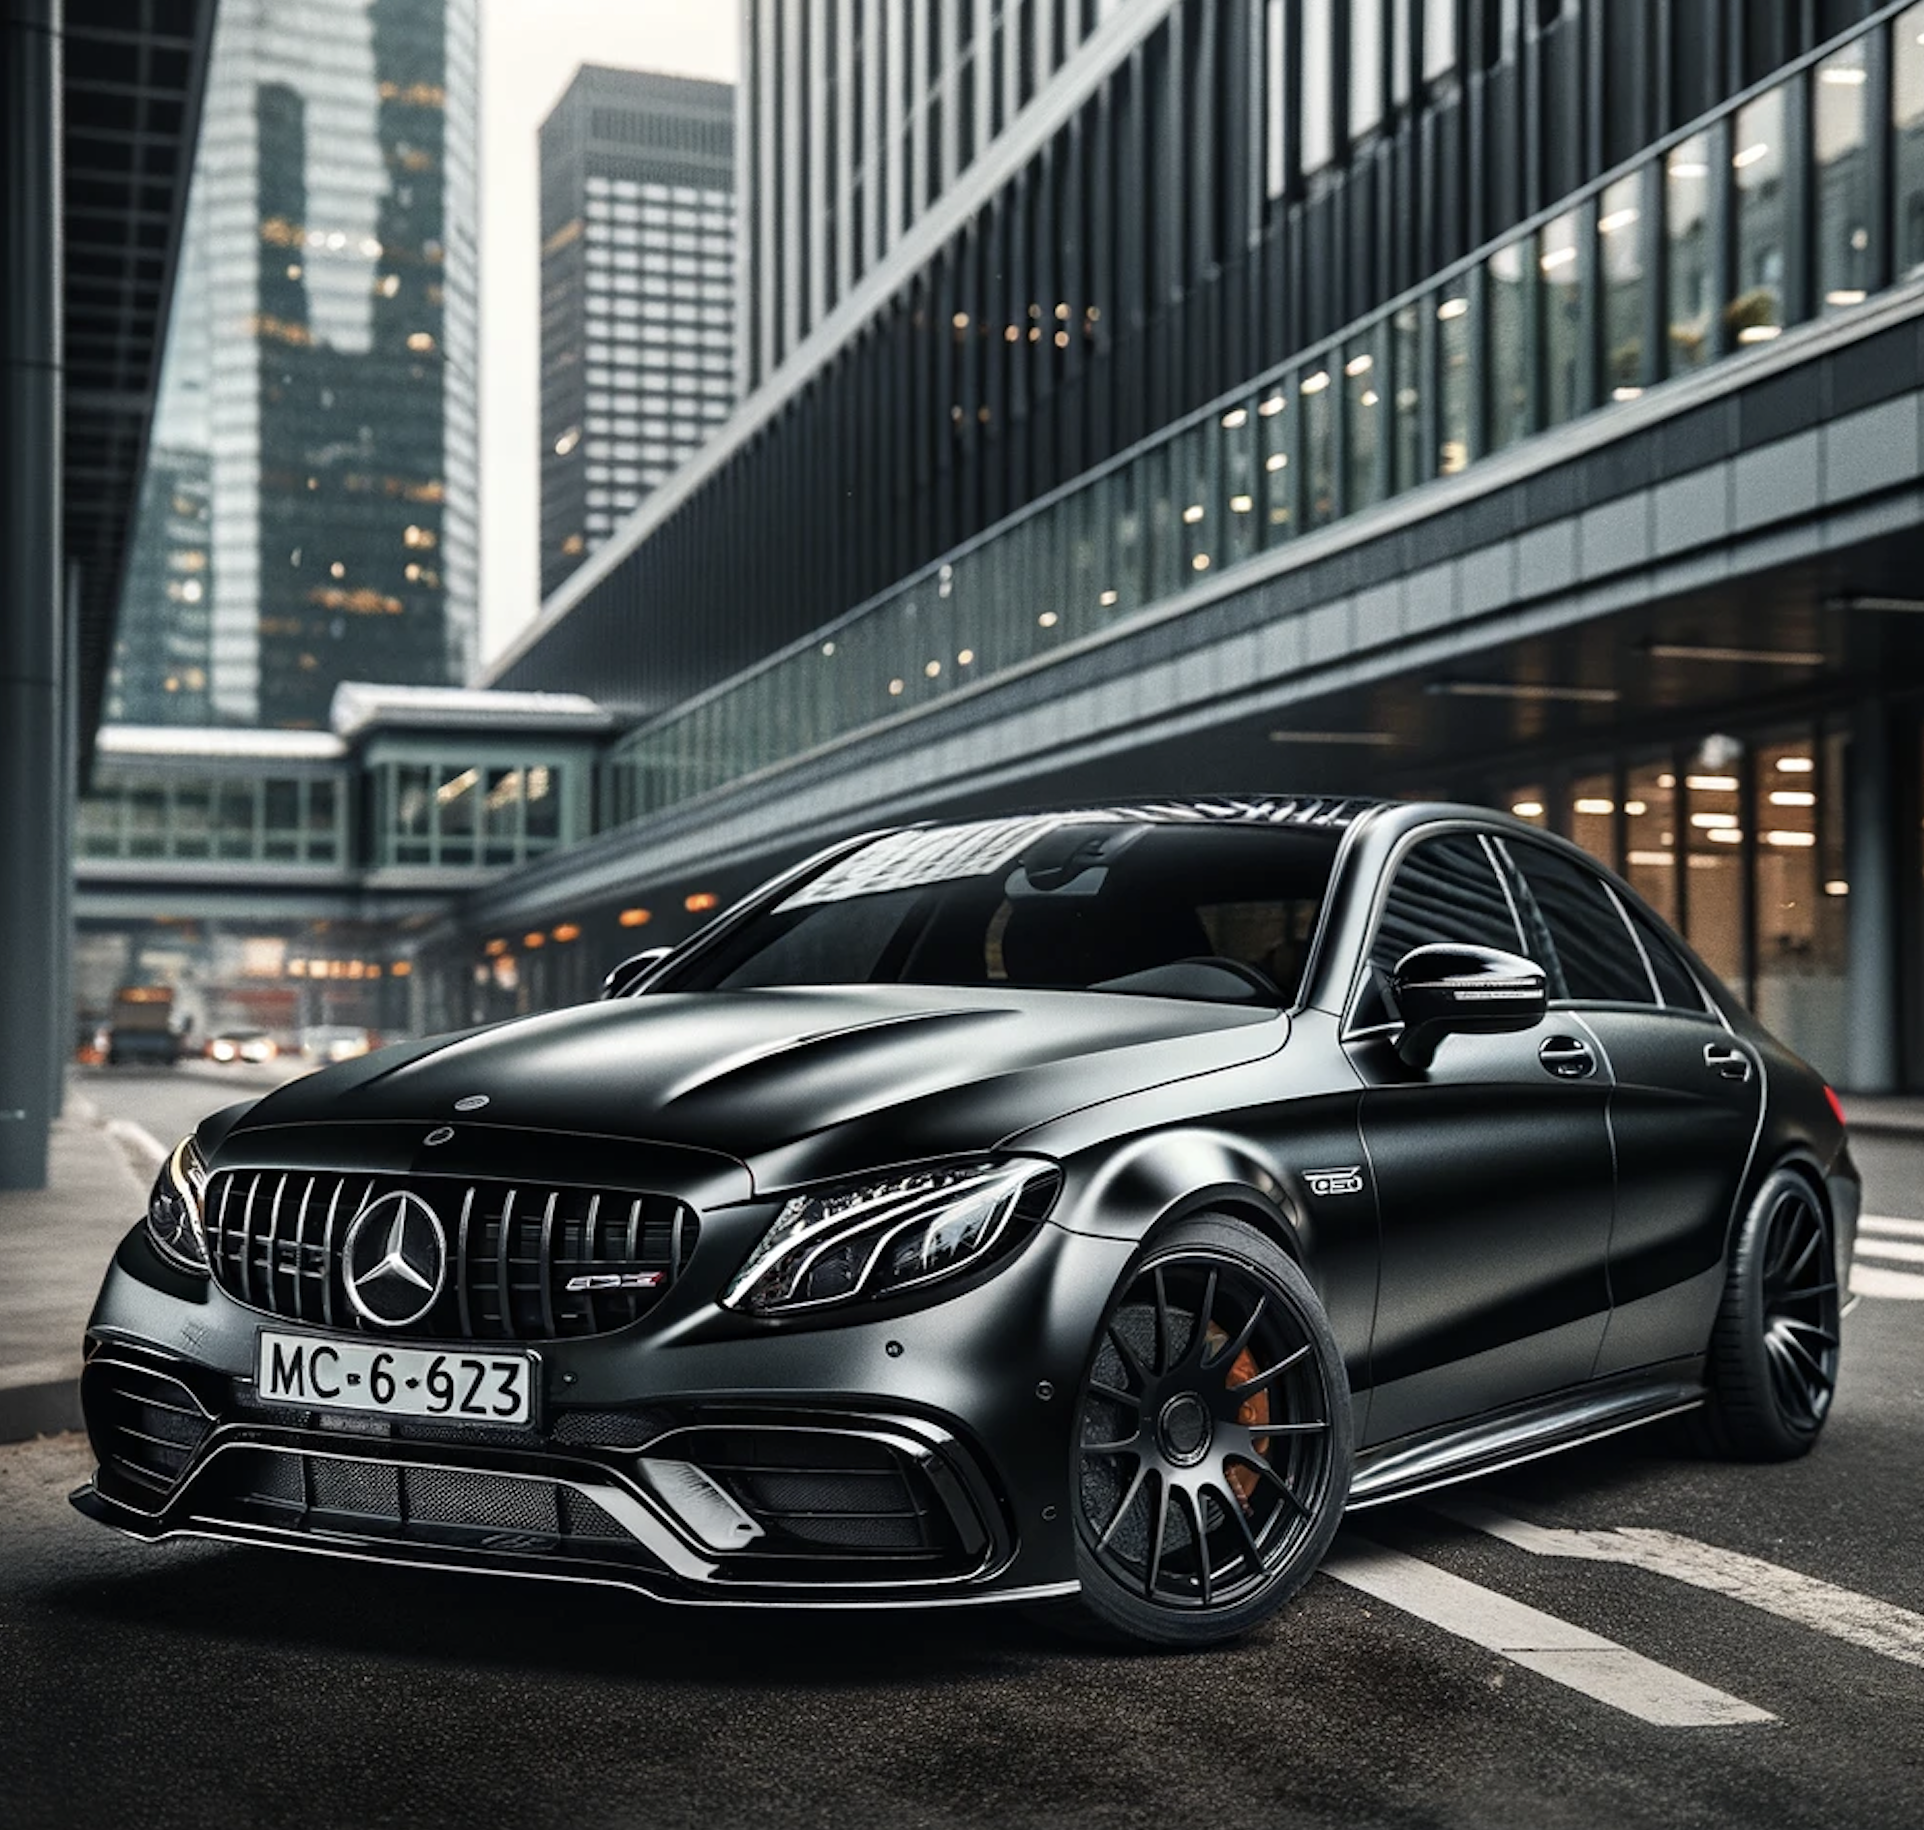 Mercedes c 63 wrapped in satin black